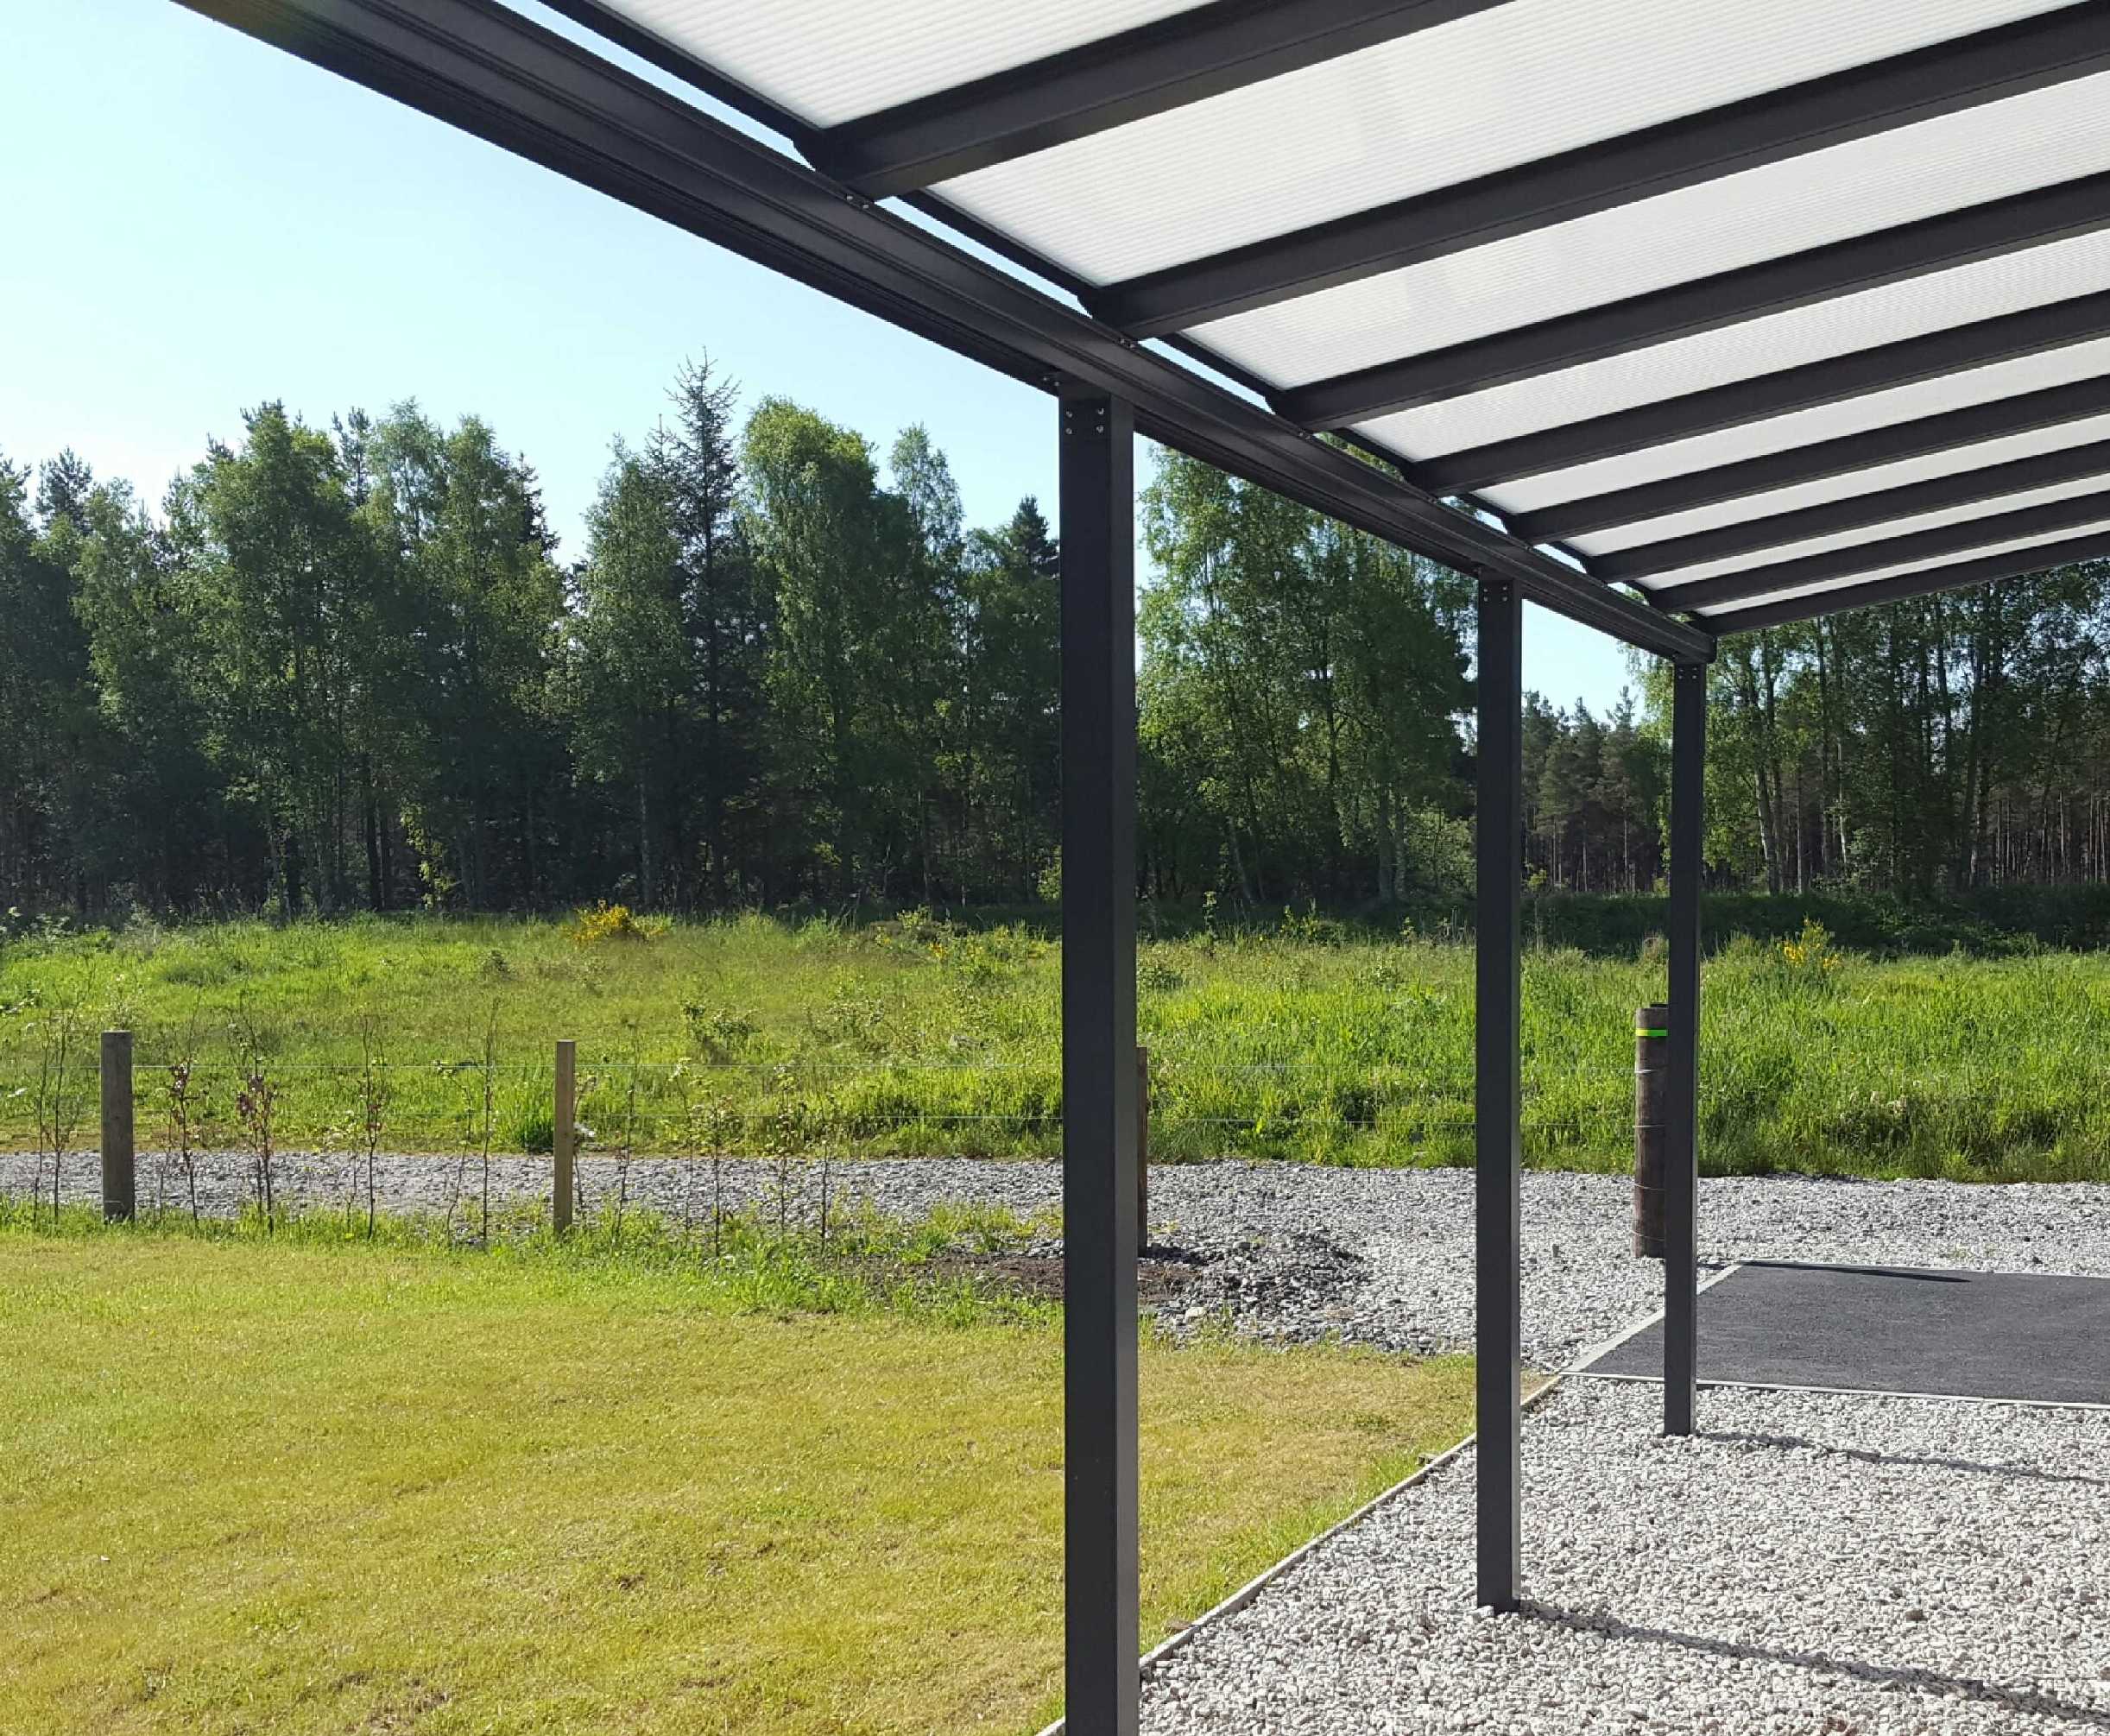 Omega Smart Lean-To Canopy, Anthracite Grey, UNGLAZED for 6mm Glazing - 9.8m (W) x 1.5m (P), (5) Supporting Posts